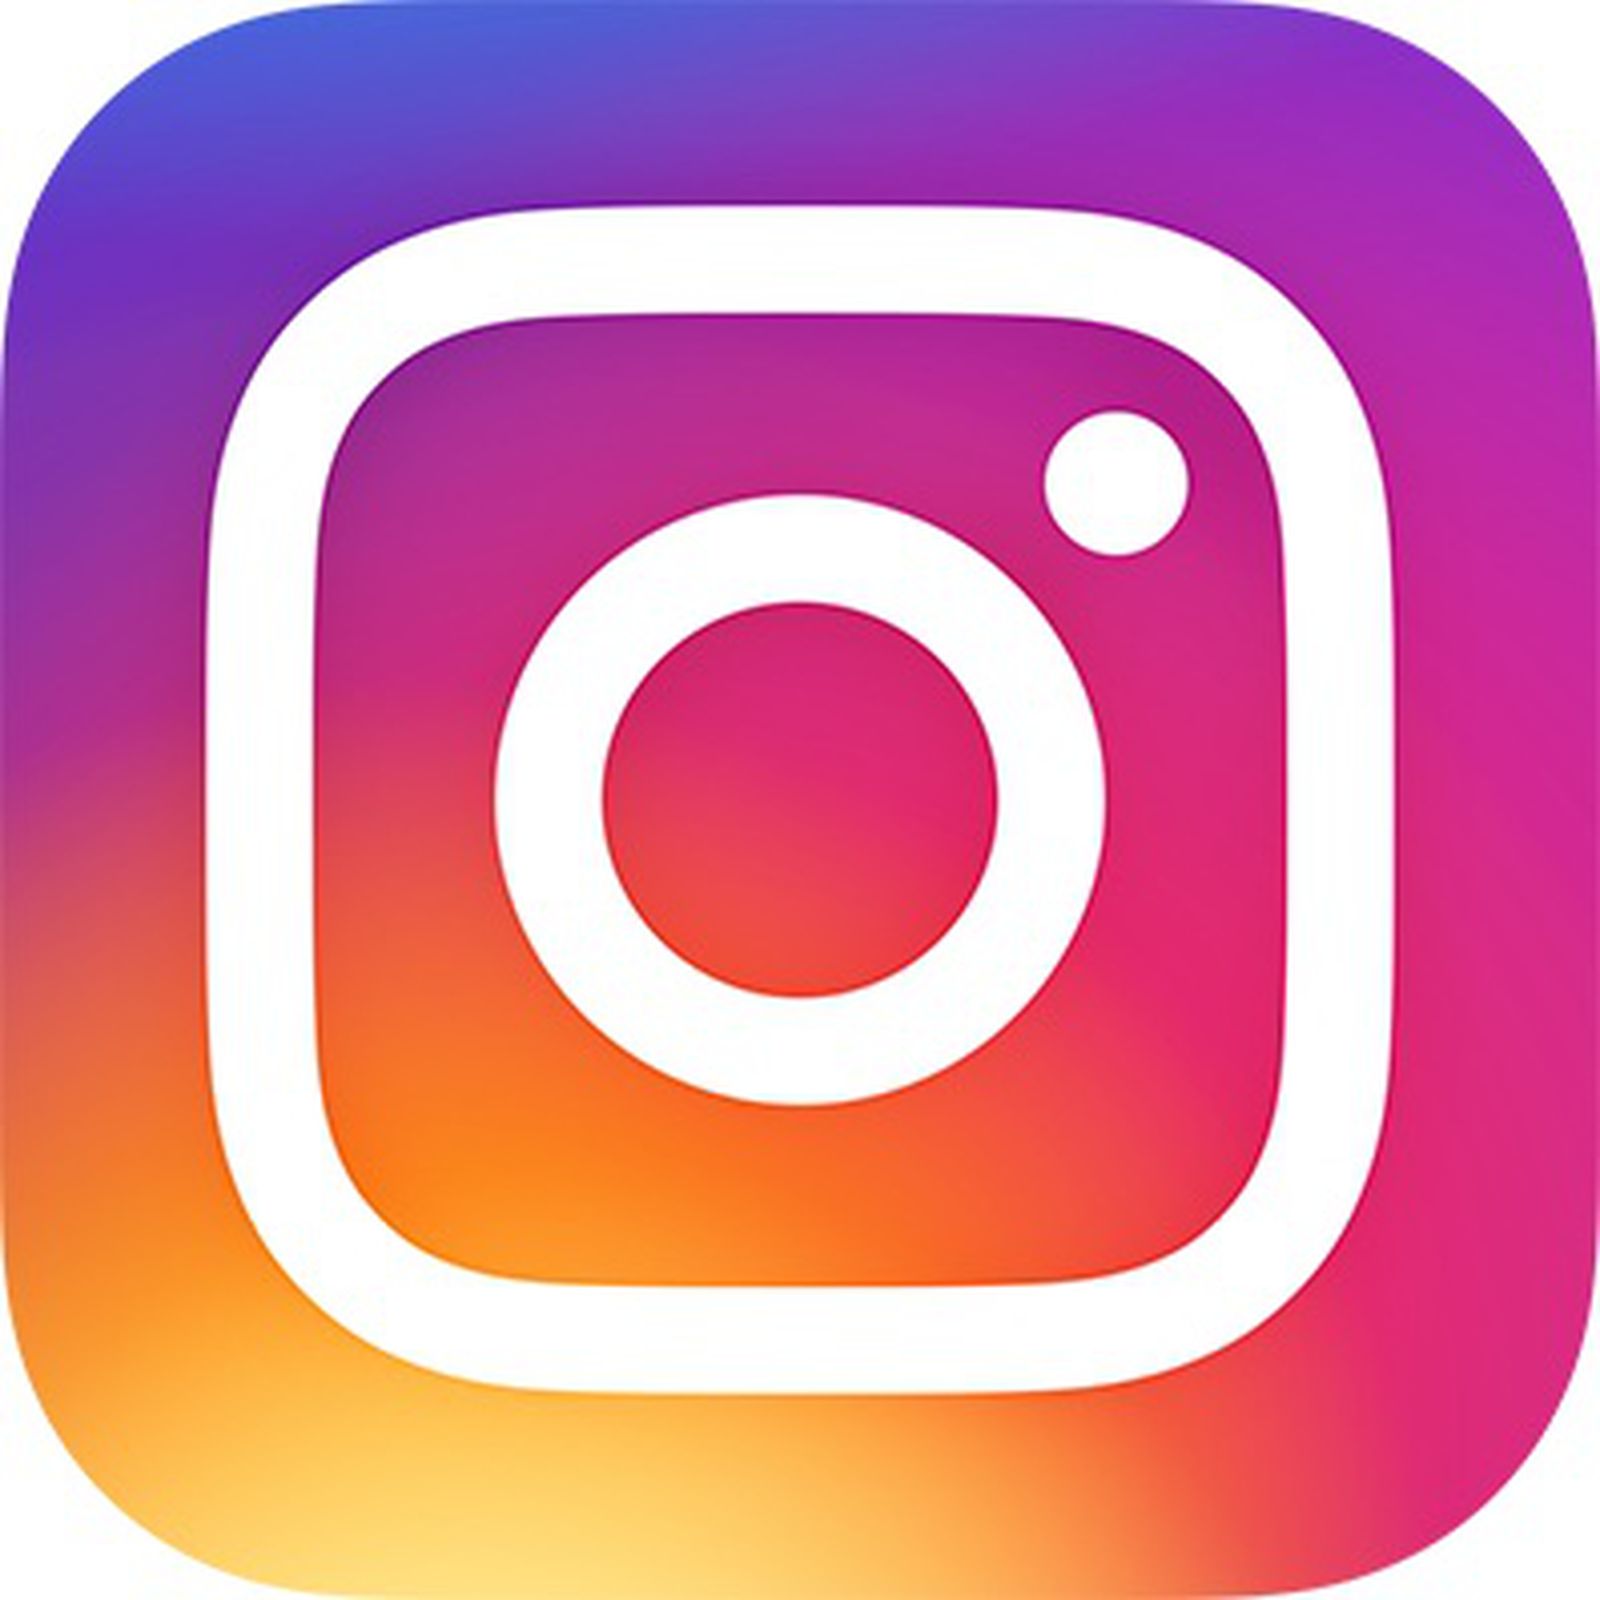 Instagram Adds New Options for Bulk Deleting Comments and Controlling Who Can Tag and Mention You - MacRumors